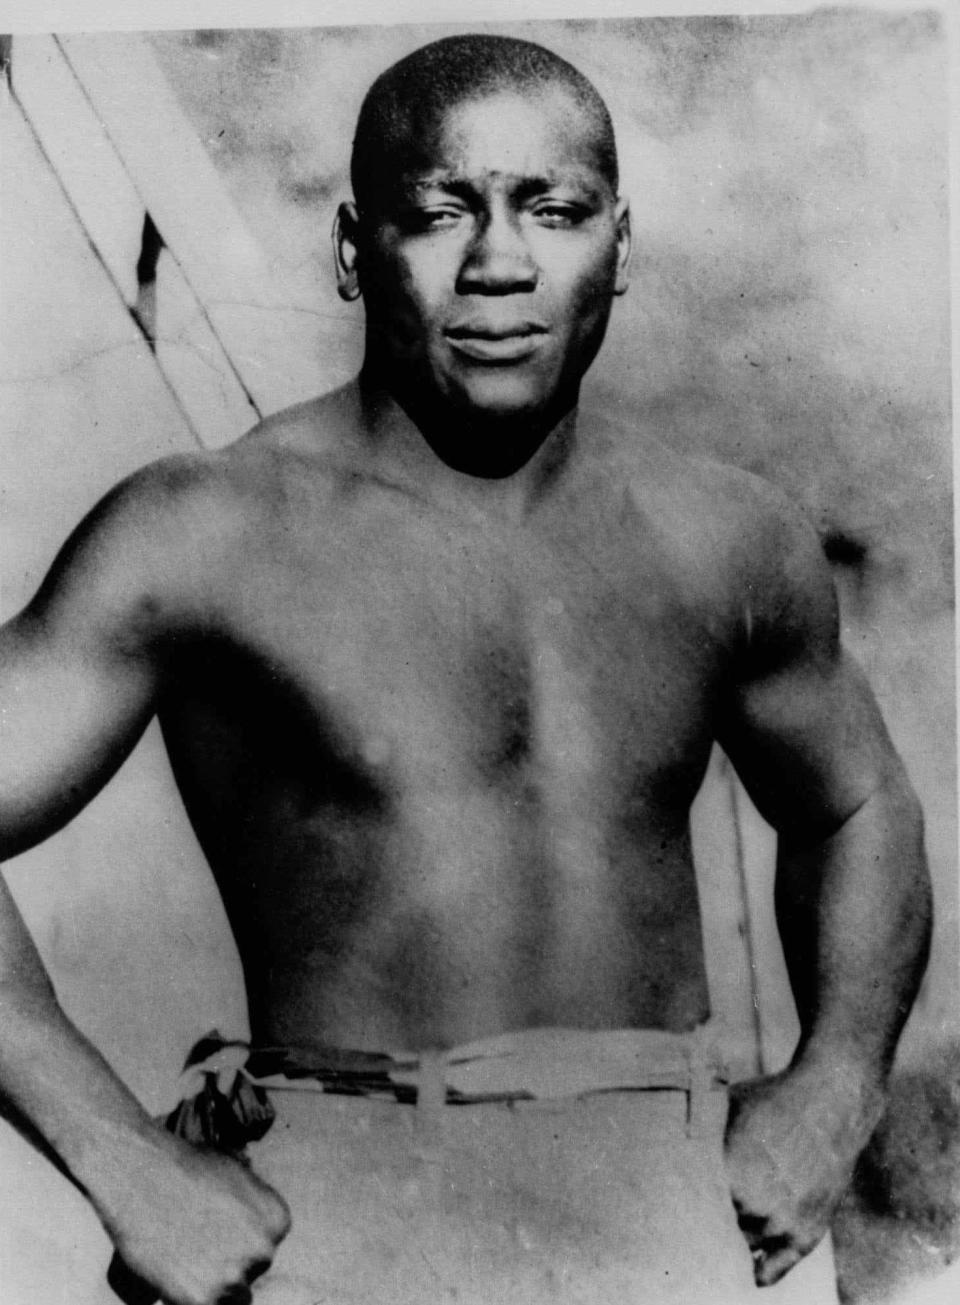 Jack Johnson, born in Galveston,Texas, who became the first African-American to win the heavyweight boxing title, appears in this undated photo.